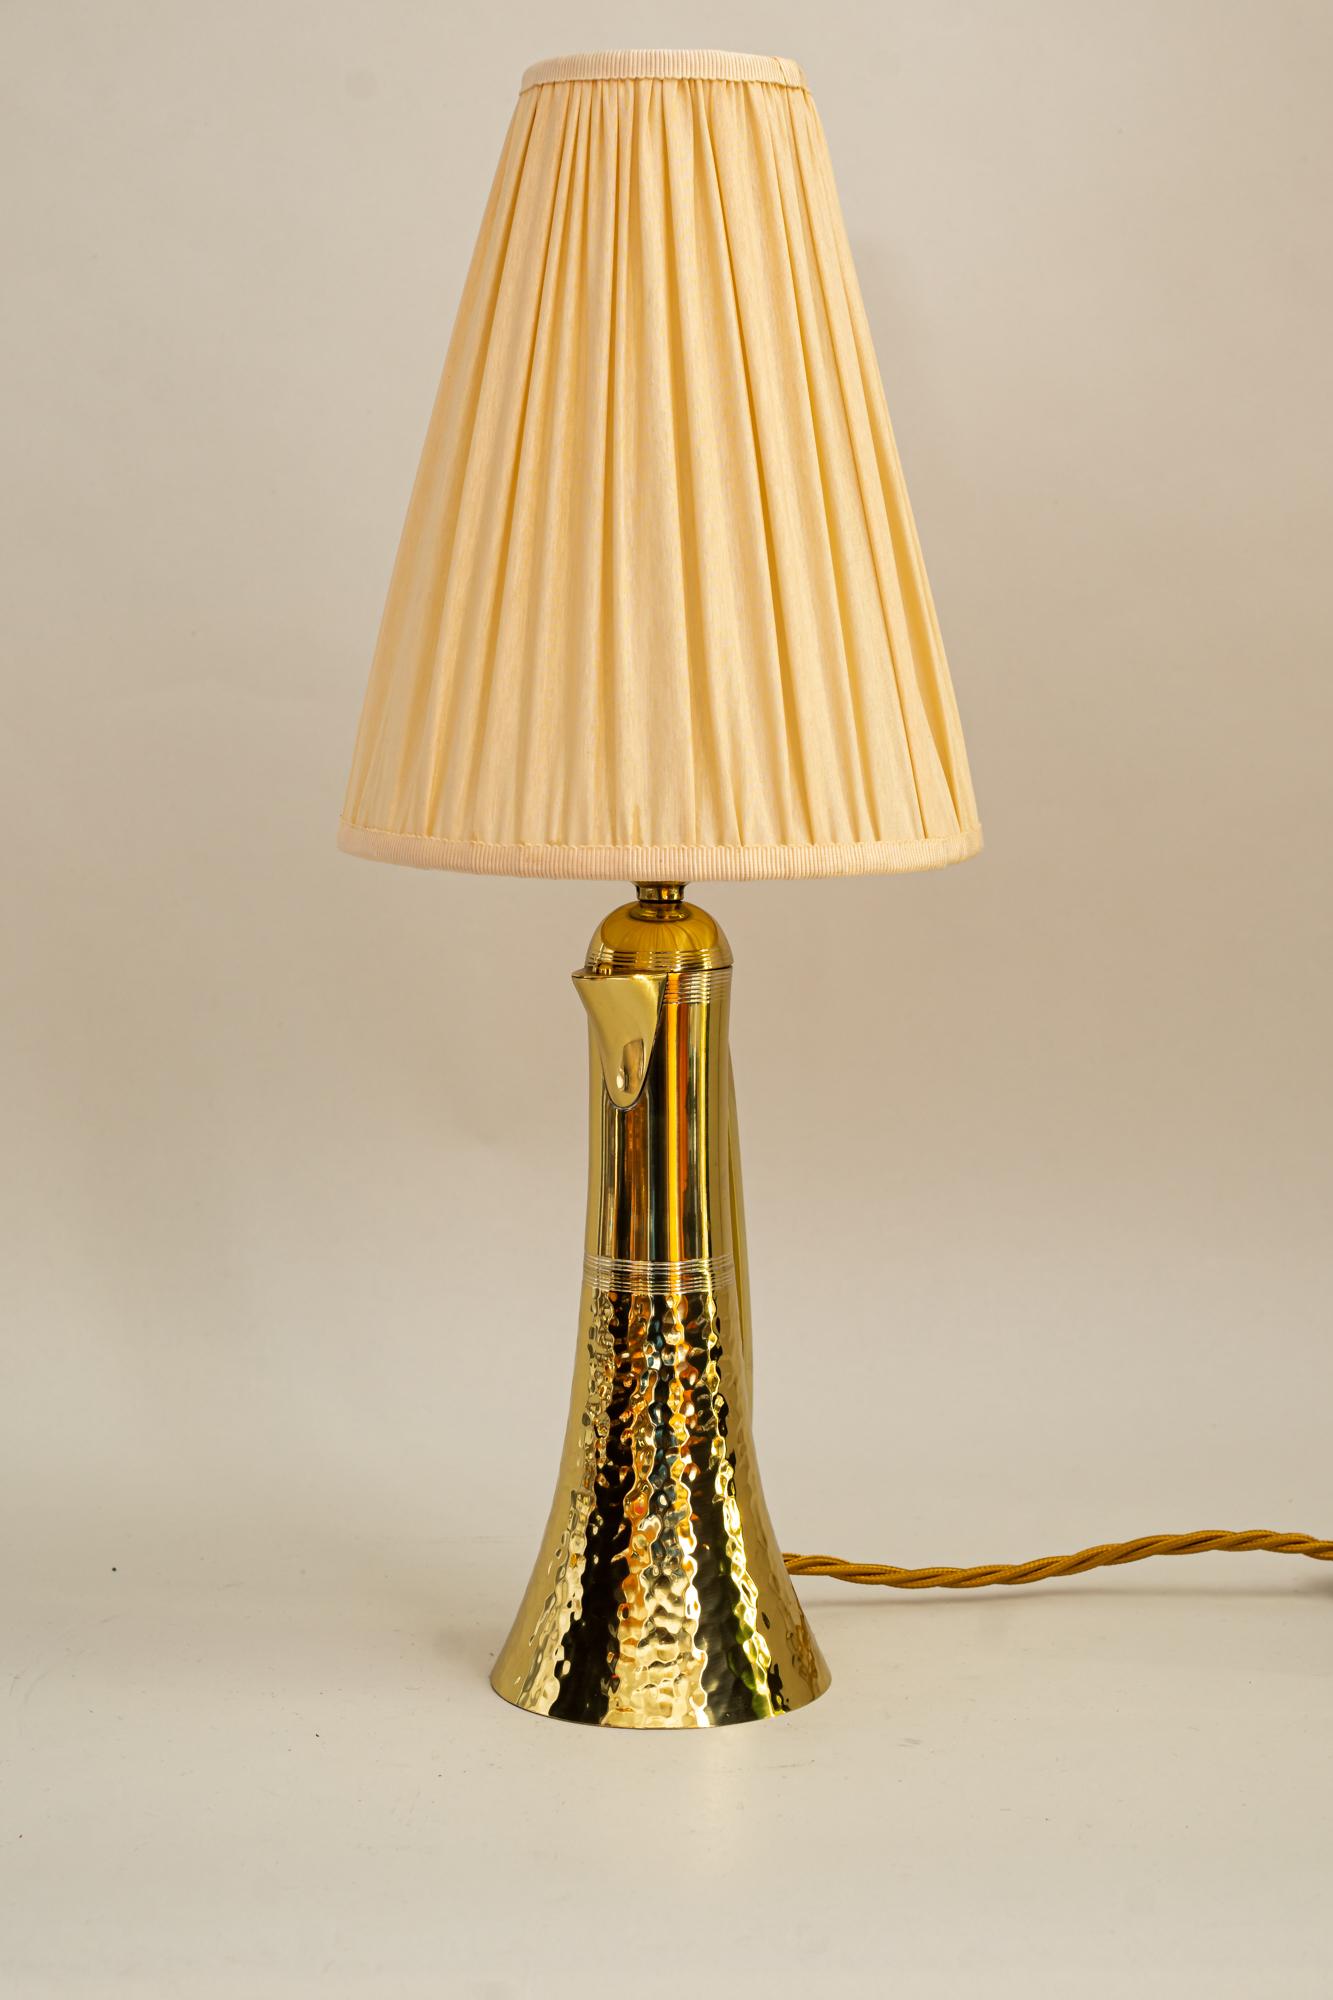 Art Deco table lamp in shape of a jug around 1920s
Polished and stove enamelled
The Fabric is replaced ( New )
Rewired.